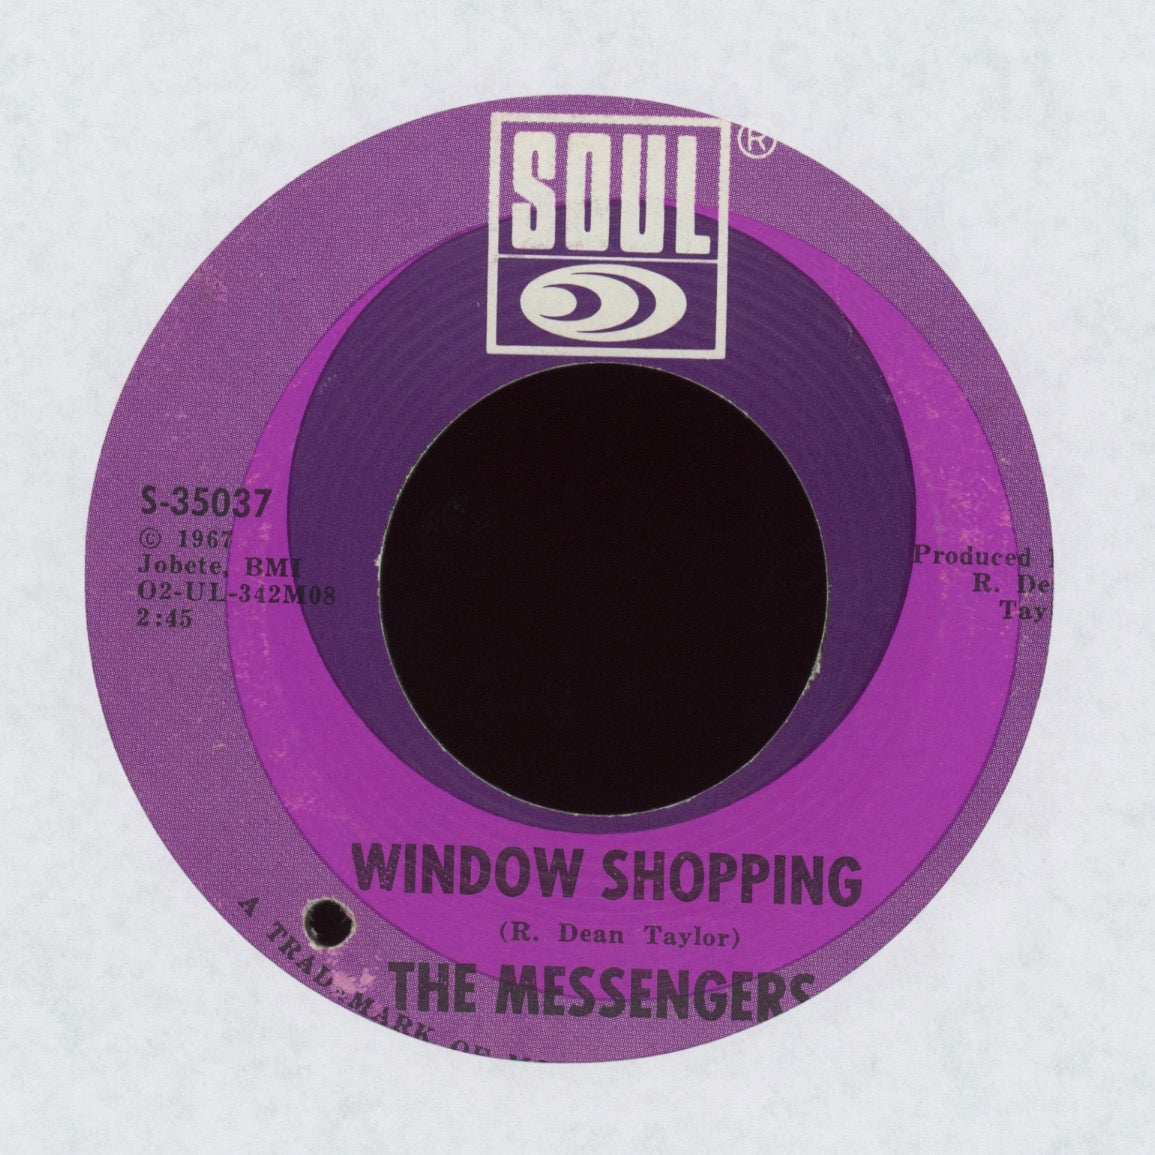 The Messengers - Window Shopping on SOUL